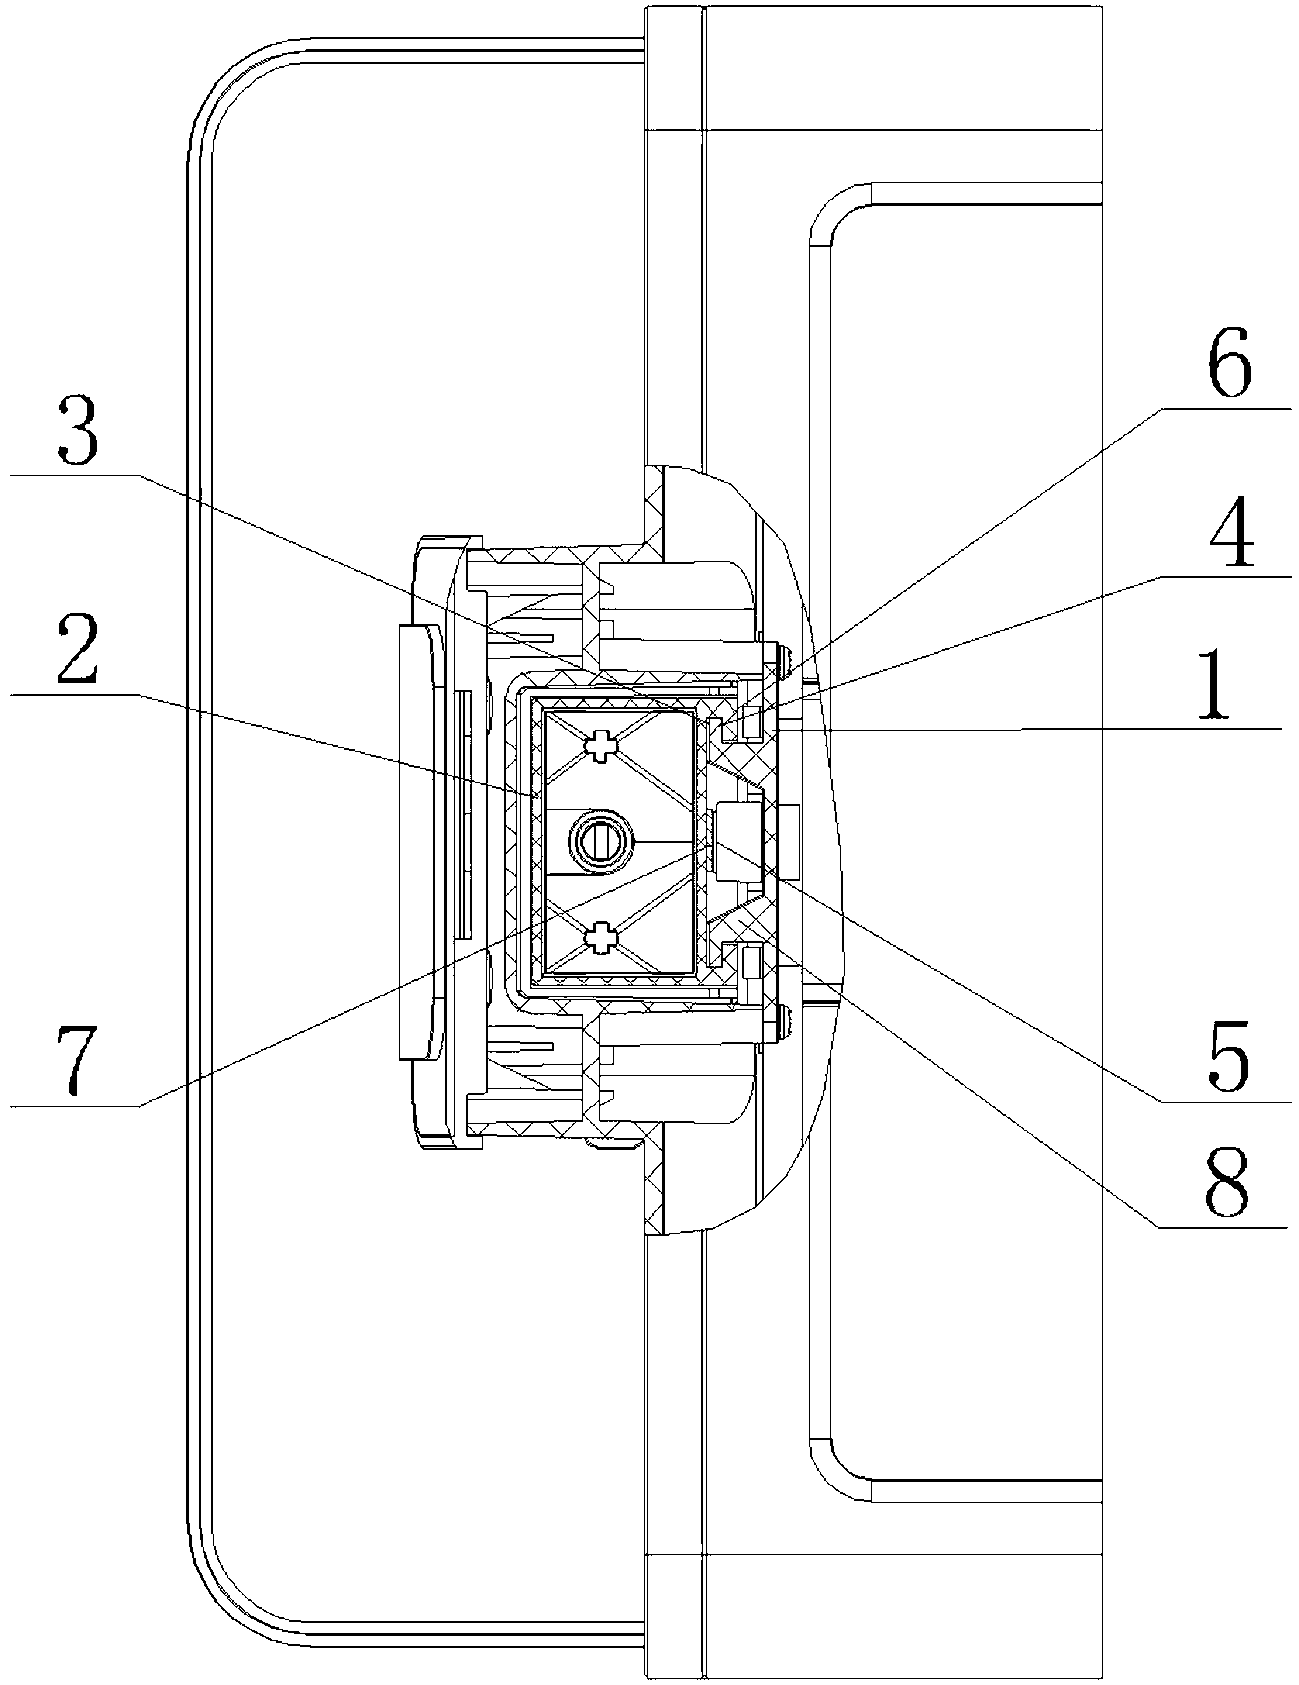 Connecting structure between coffee machine shell and water outlet slide block